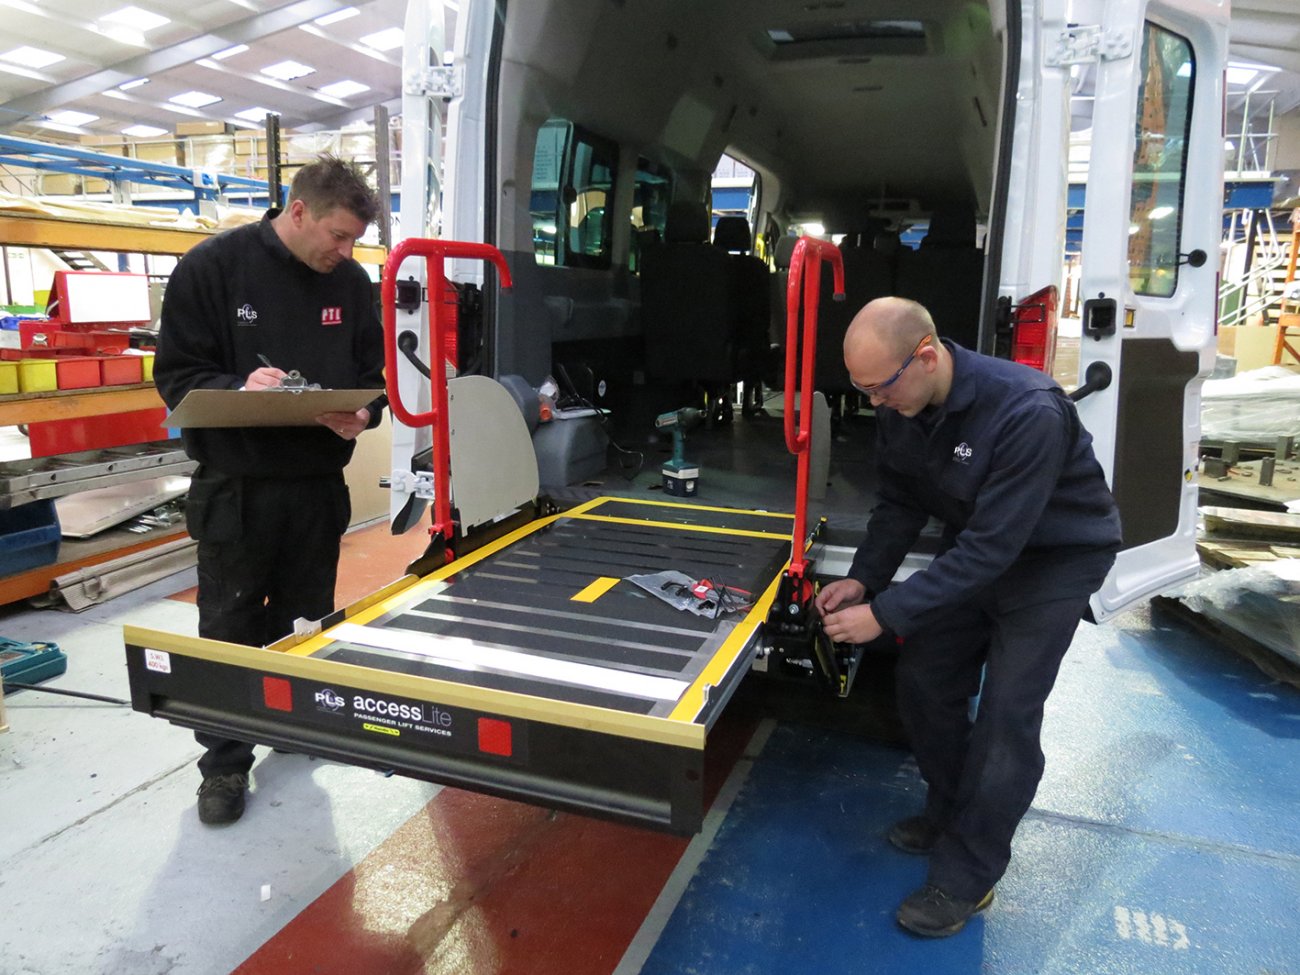 PLS lift servicing team to hold live demonstrations on Mobility Networks stand at Eurobus Expo